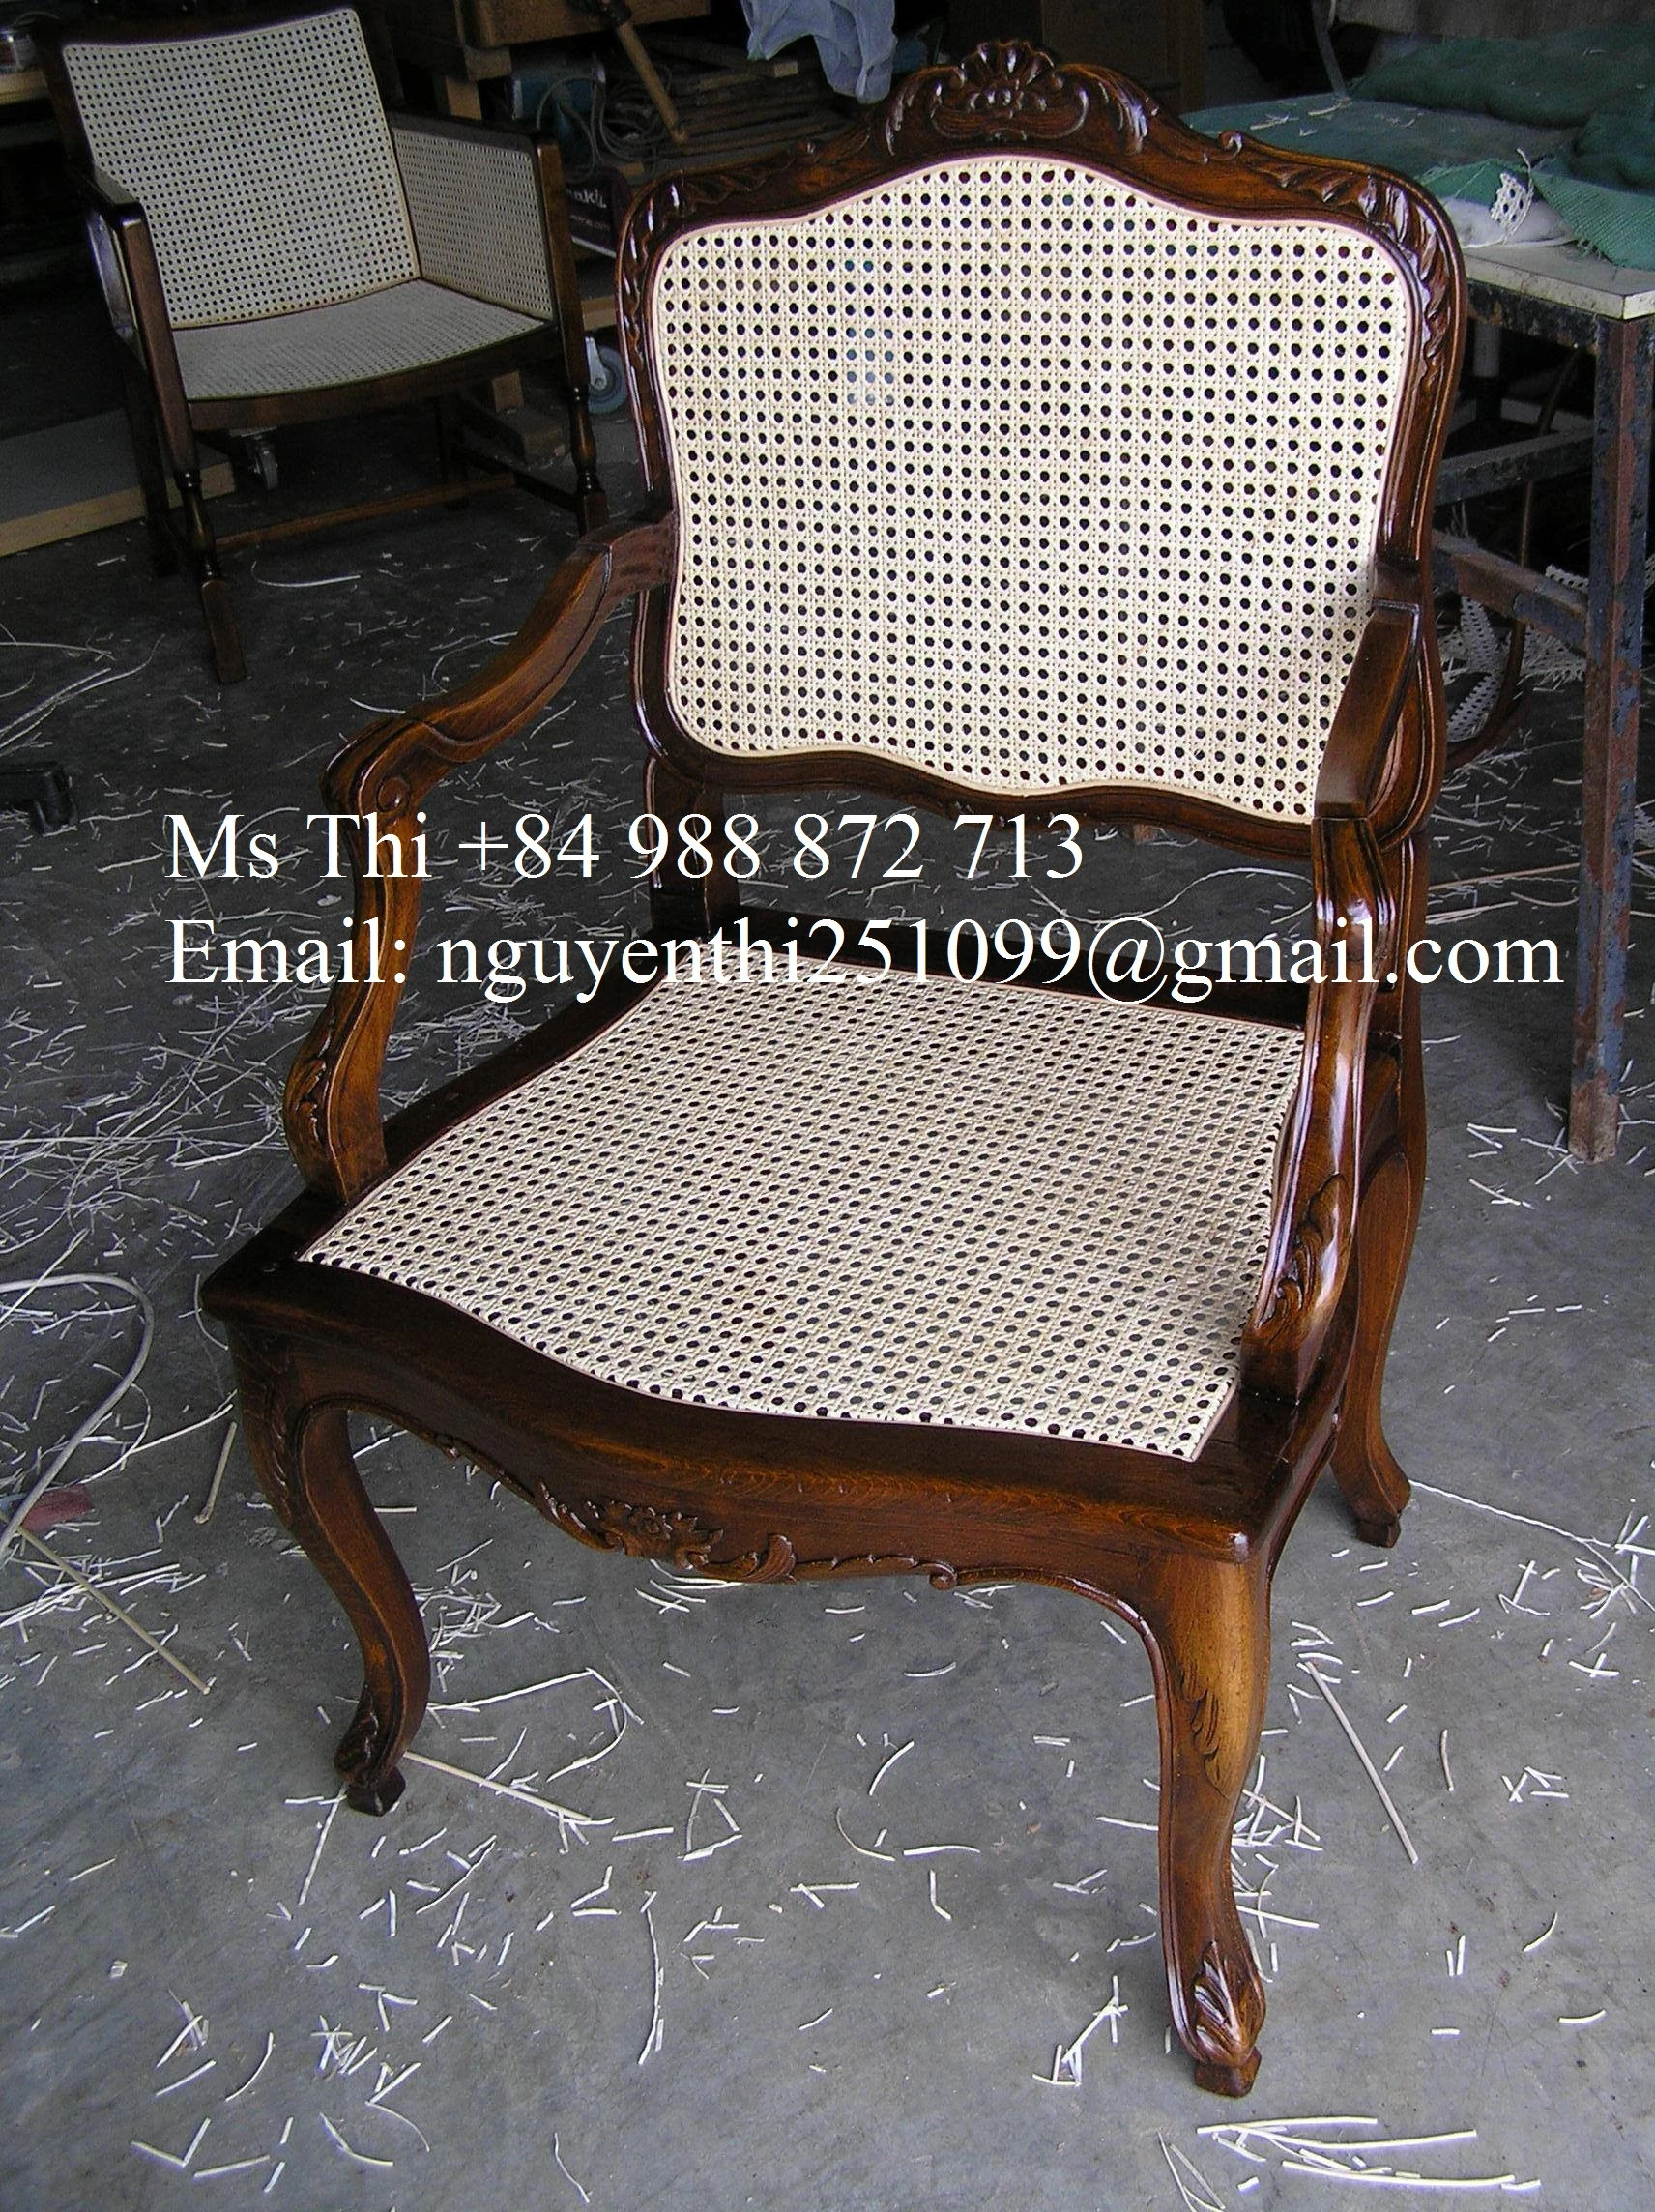 Manufacturers rattan cane webbing/Rattan webbing roll color bleaching from Vietnam /Ms Thi+84 988 872 713